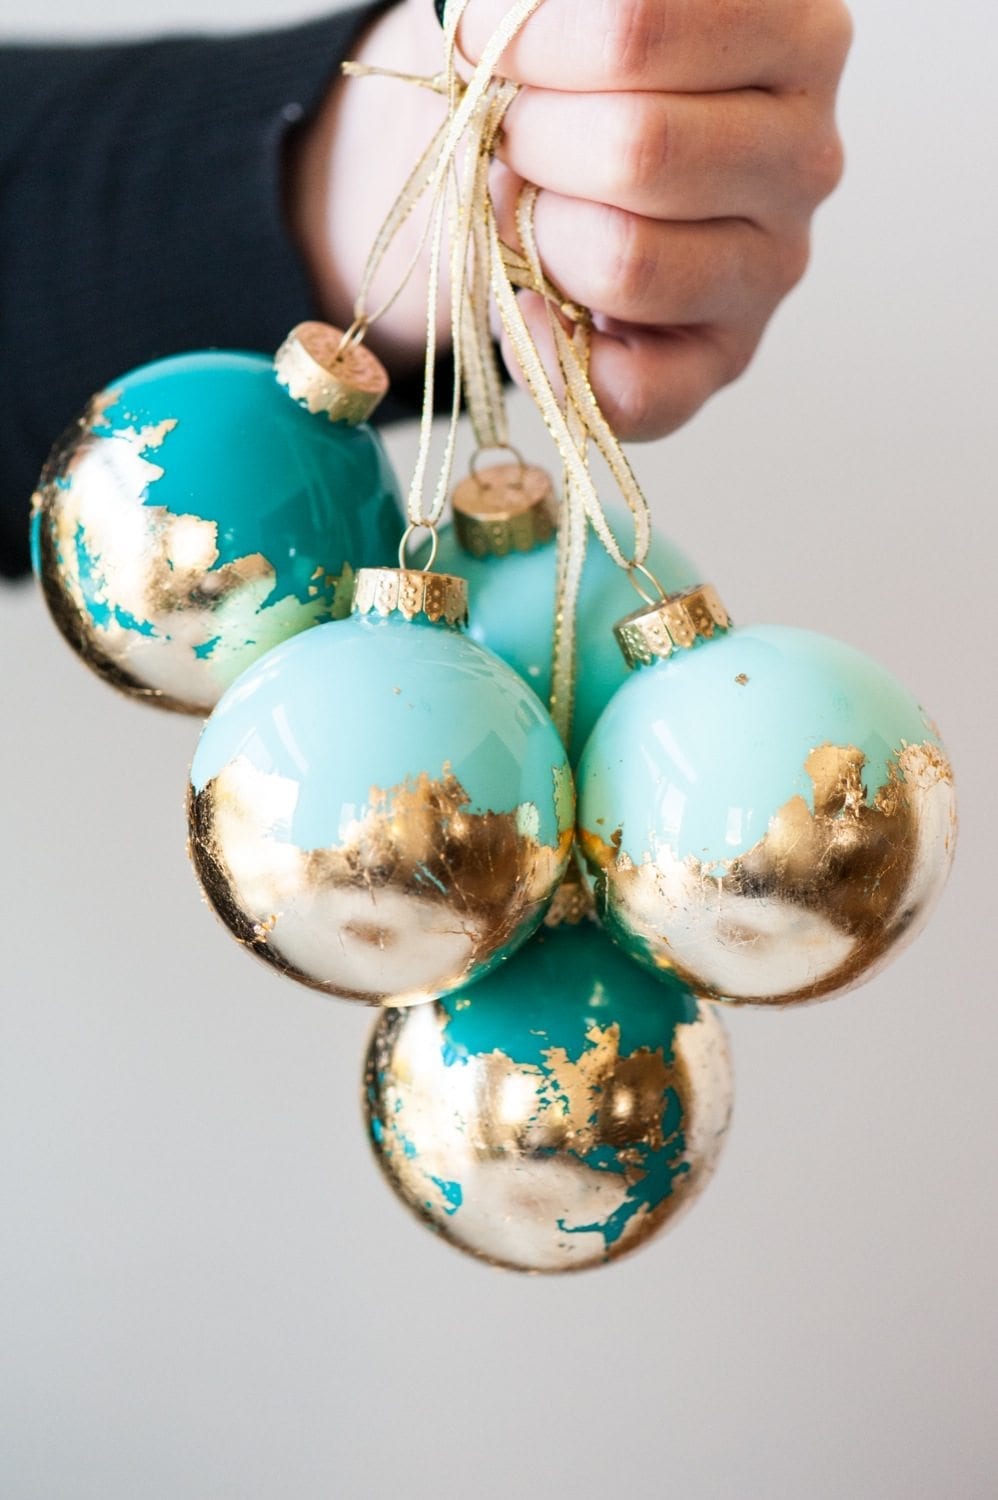 DIY Painted Gold Leaf Ornaments by @cydconverse